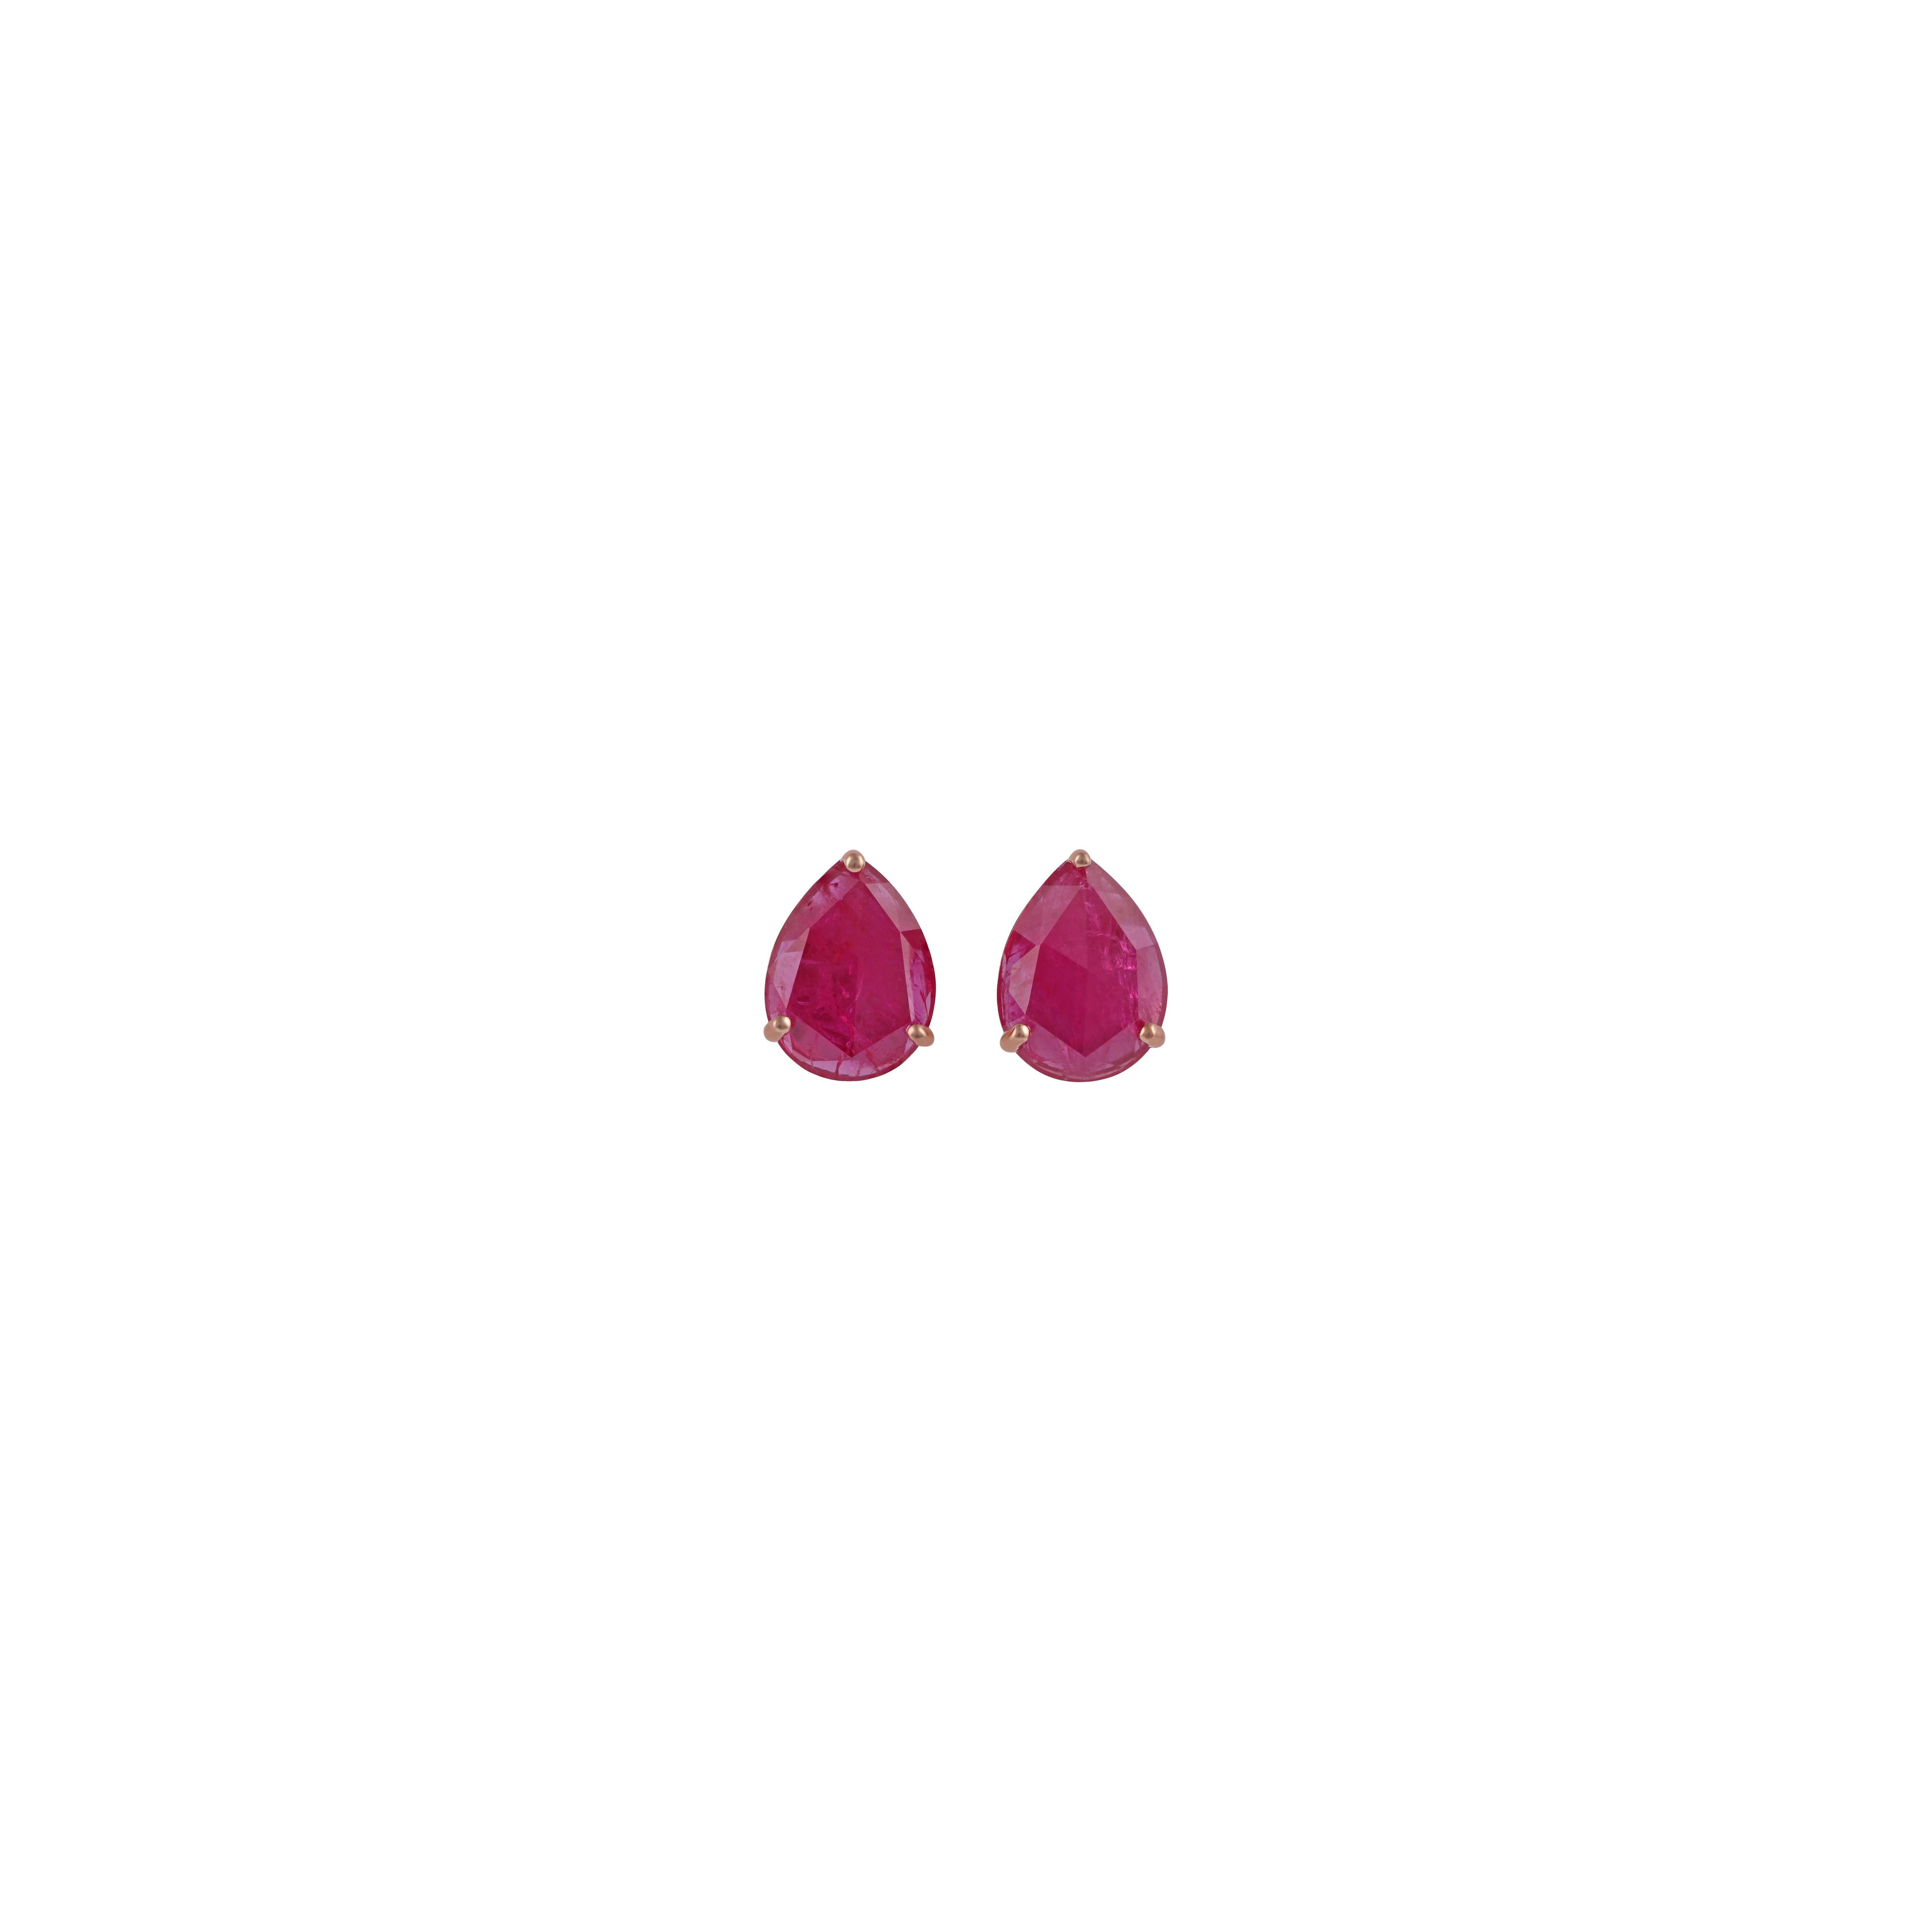 Magnificent Mozambique Ruby Stud Earrings
Mozambique Ruby approx. 3.13 CTS
18k Rose gold mounting 2.39 Gms

Custom Services
Request Customization